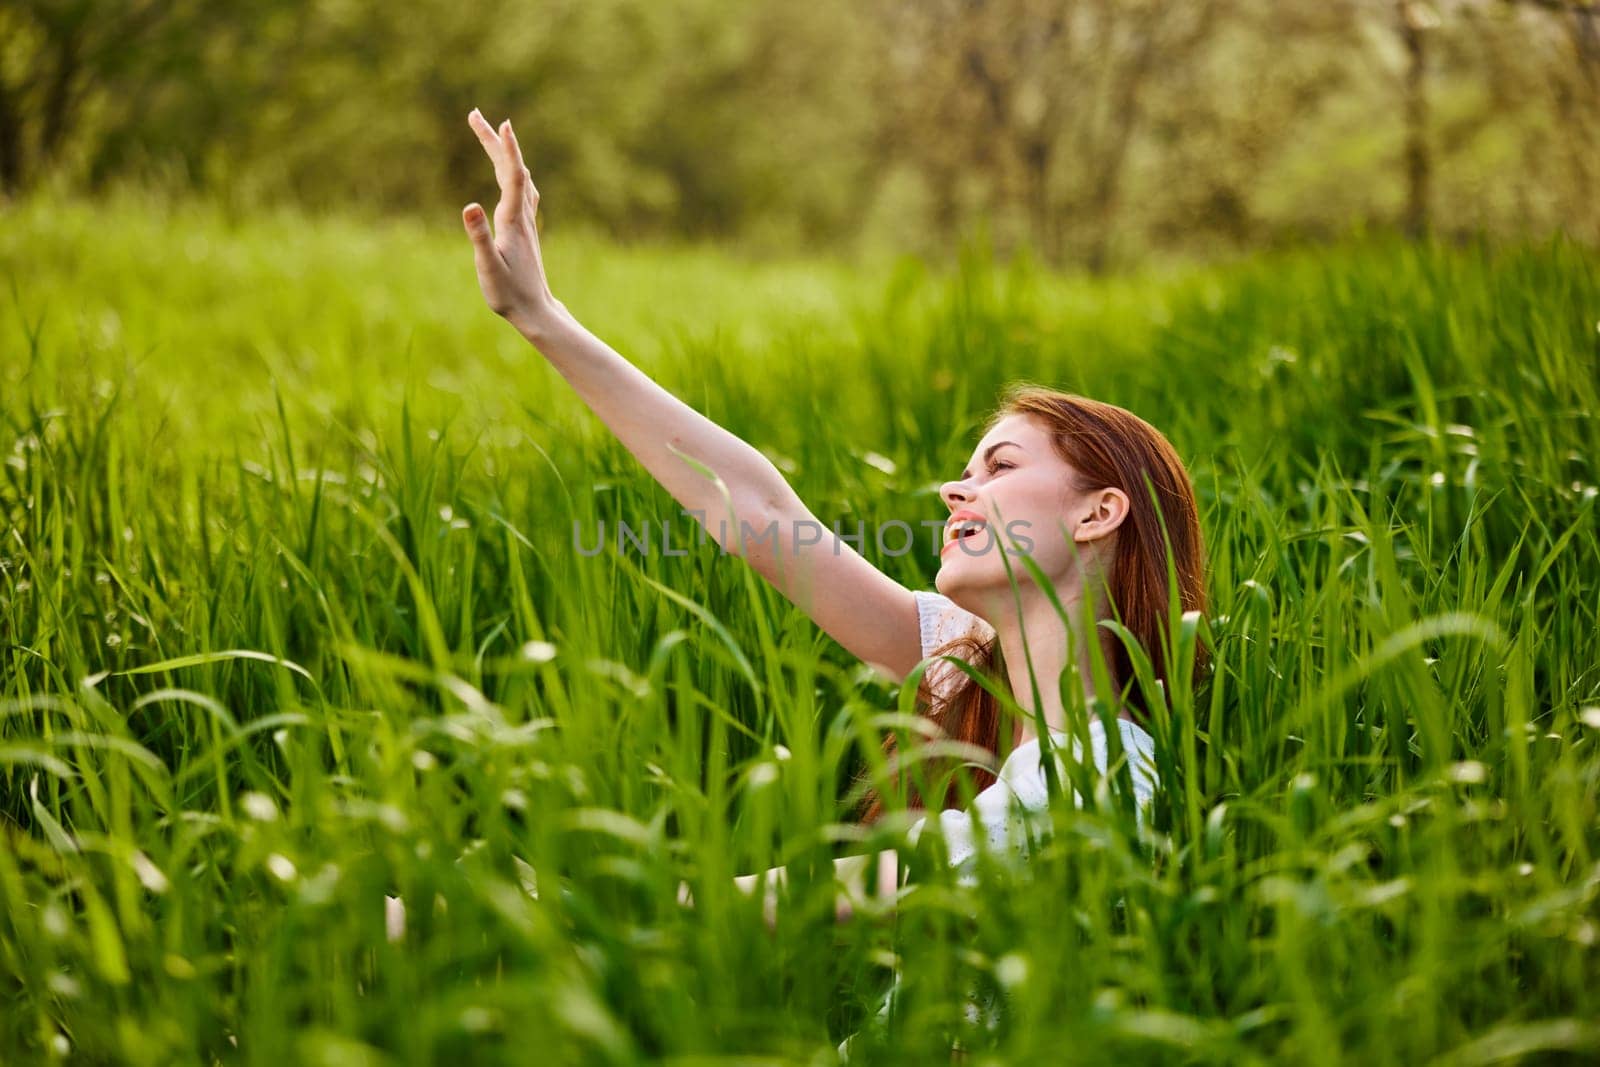 happy, contented woman sitting in tall green grass enjoying a pleasant day with her arms raised high by Vichizh